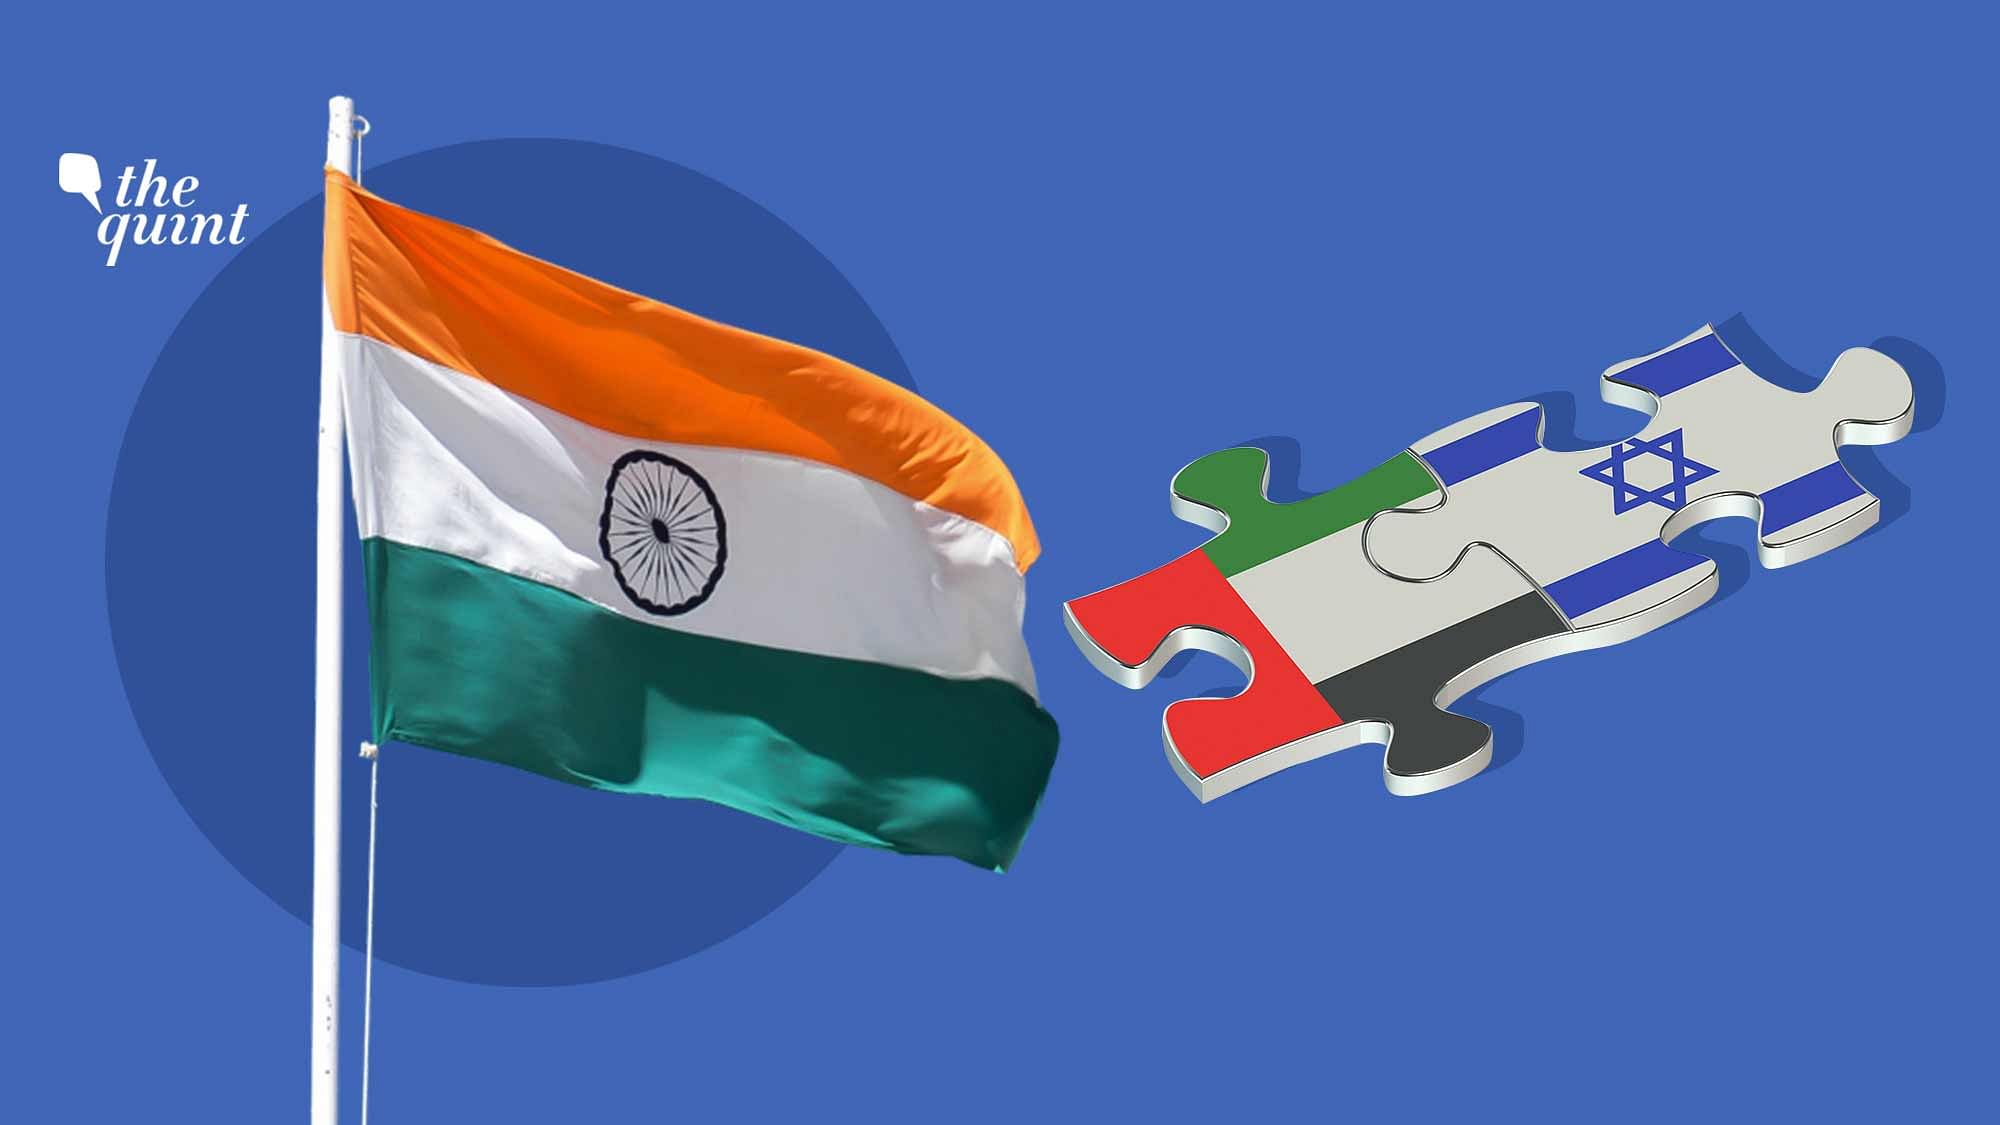 Image of Indian flag (L) and Israel and UAE’s flags (R) used for representational purposes.